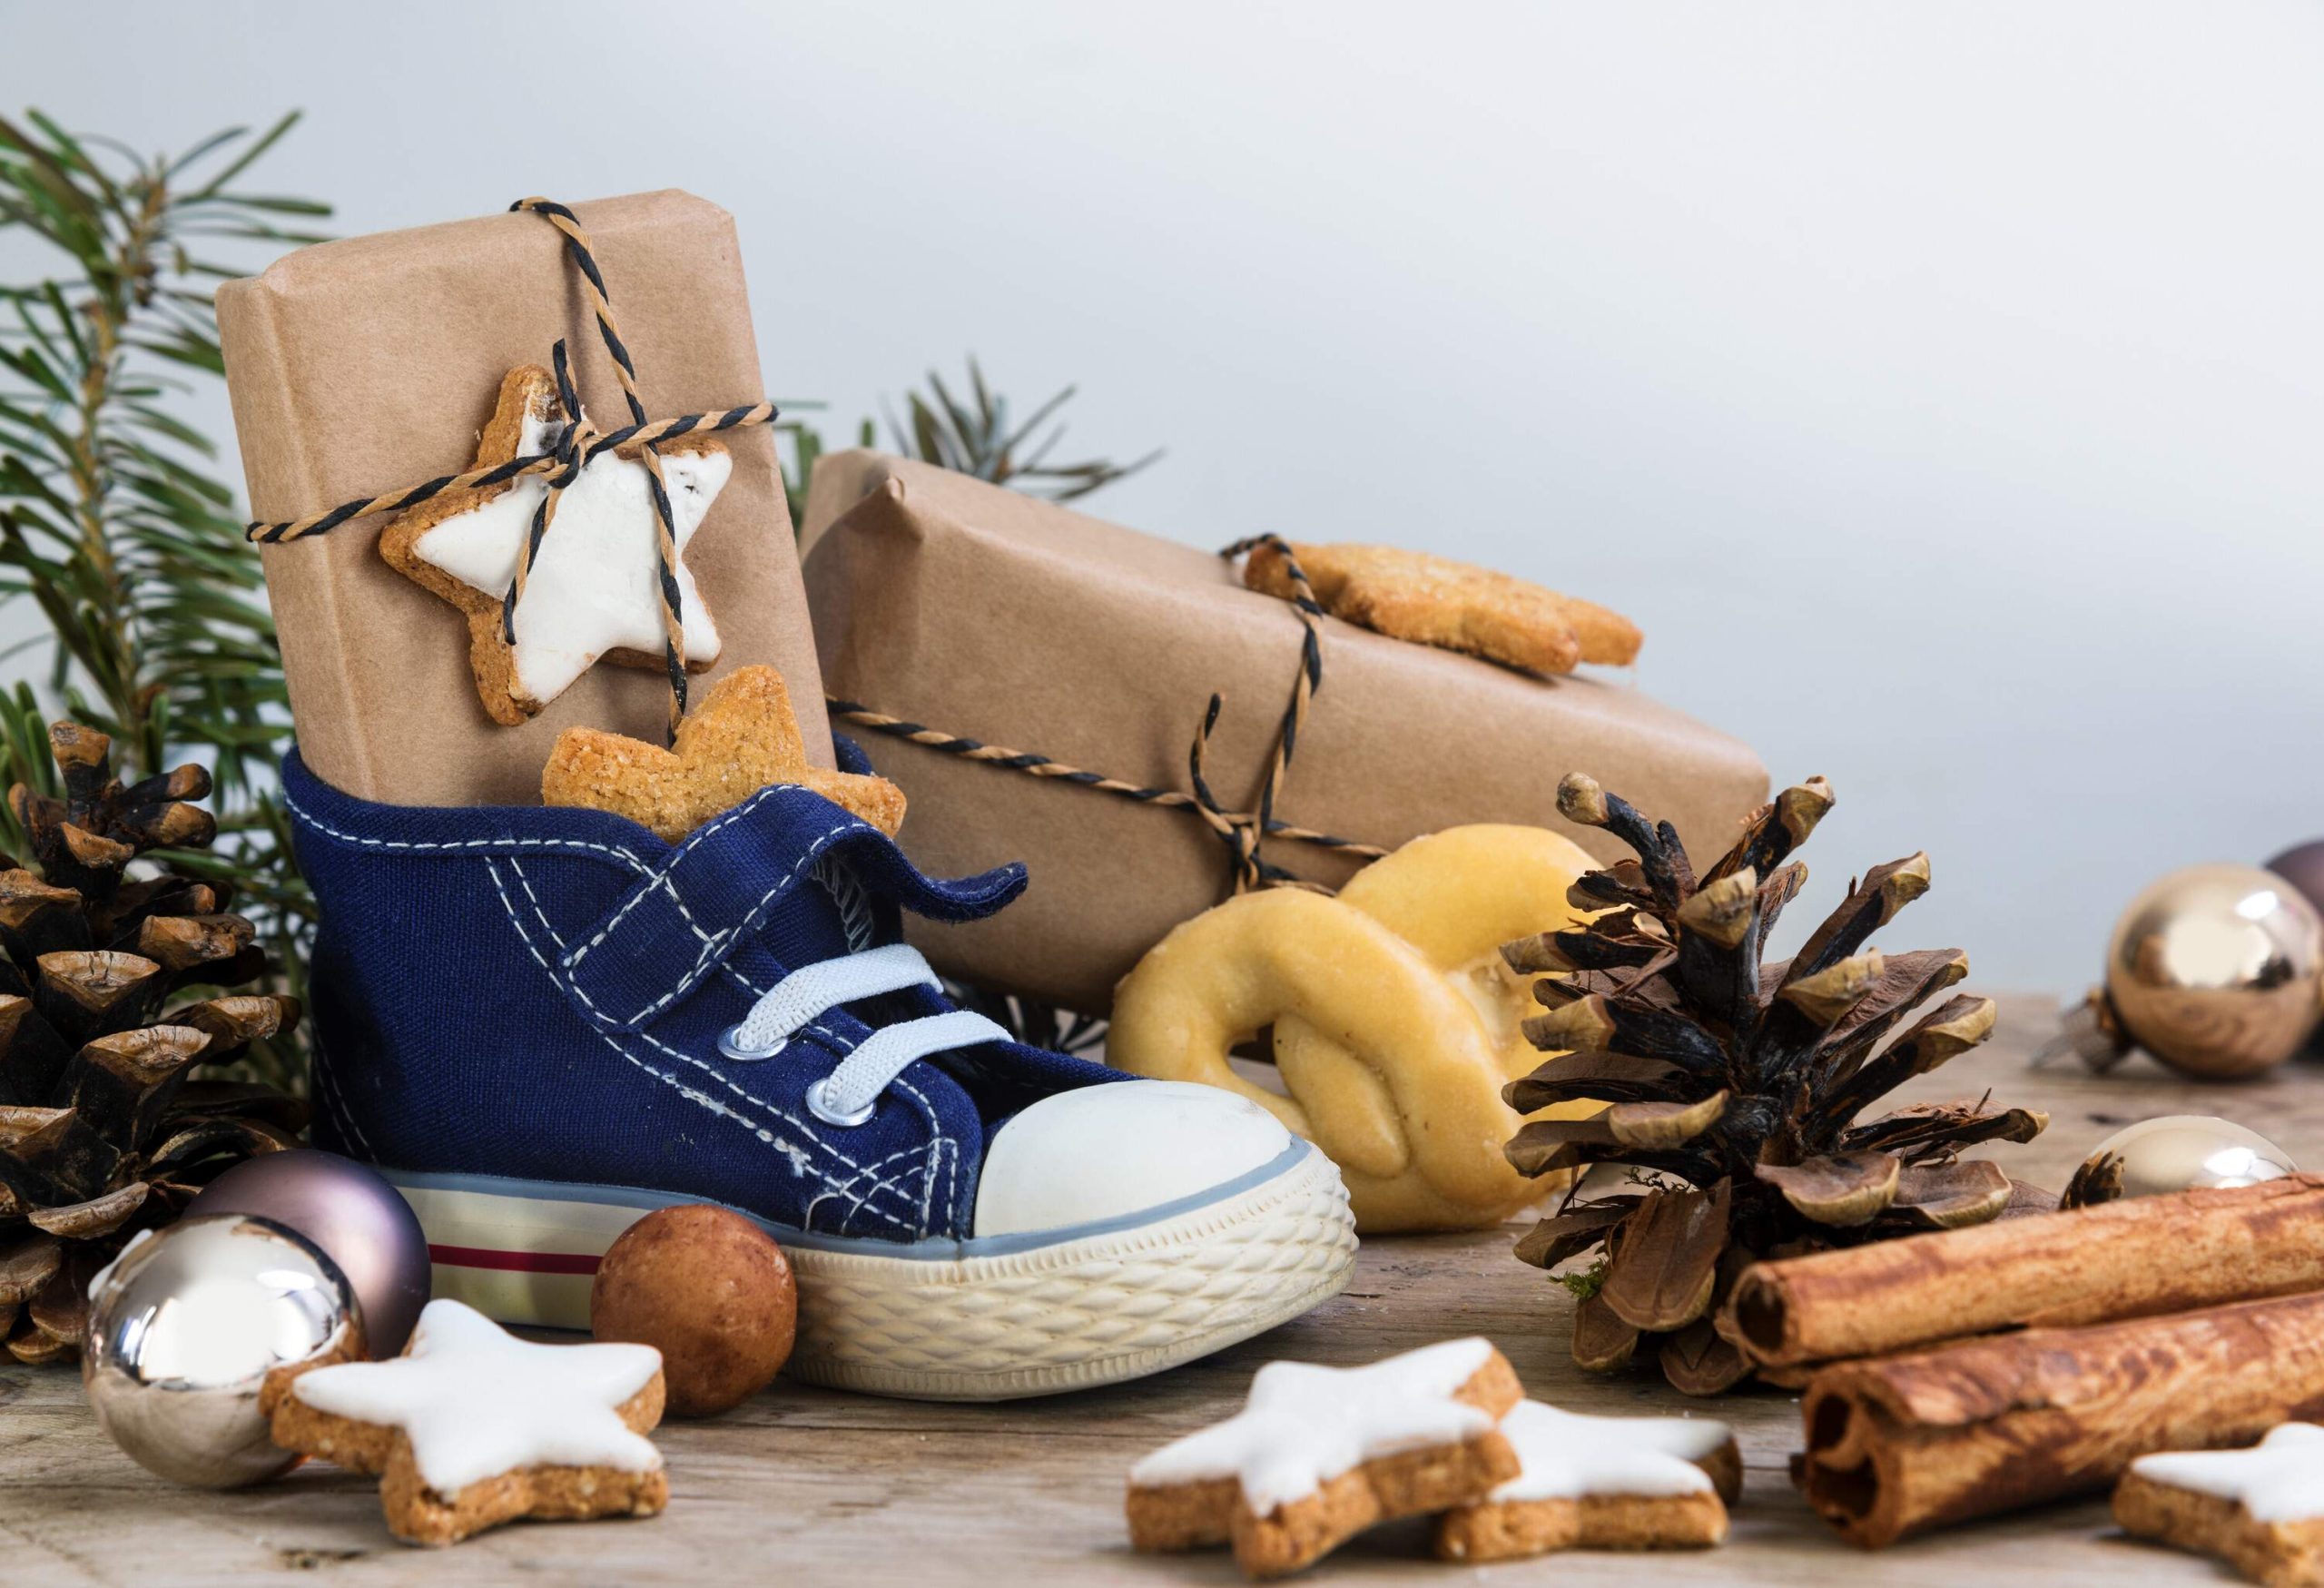 A clutter of a kid's shoe, gifts, cookies, and Christmas ornaments on wood. 